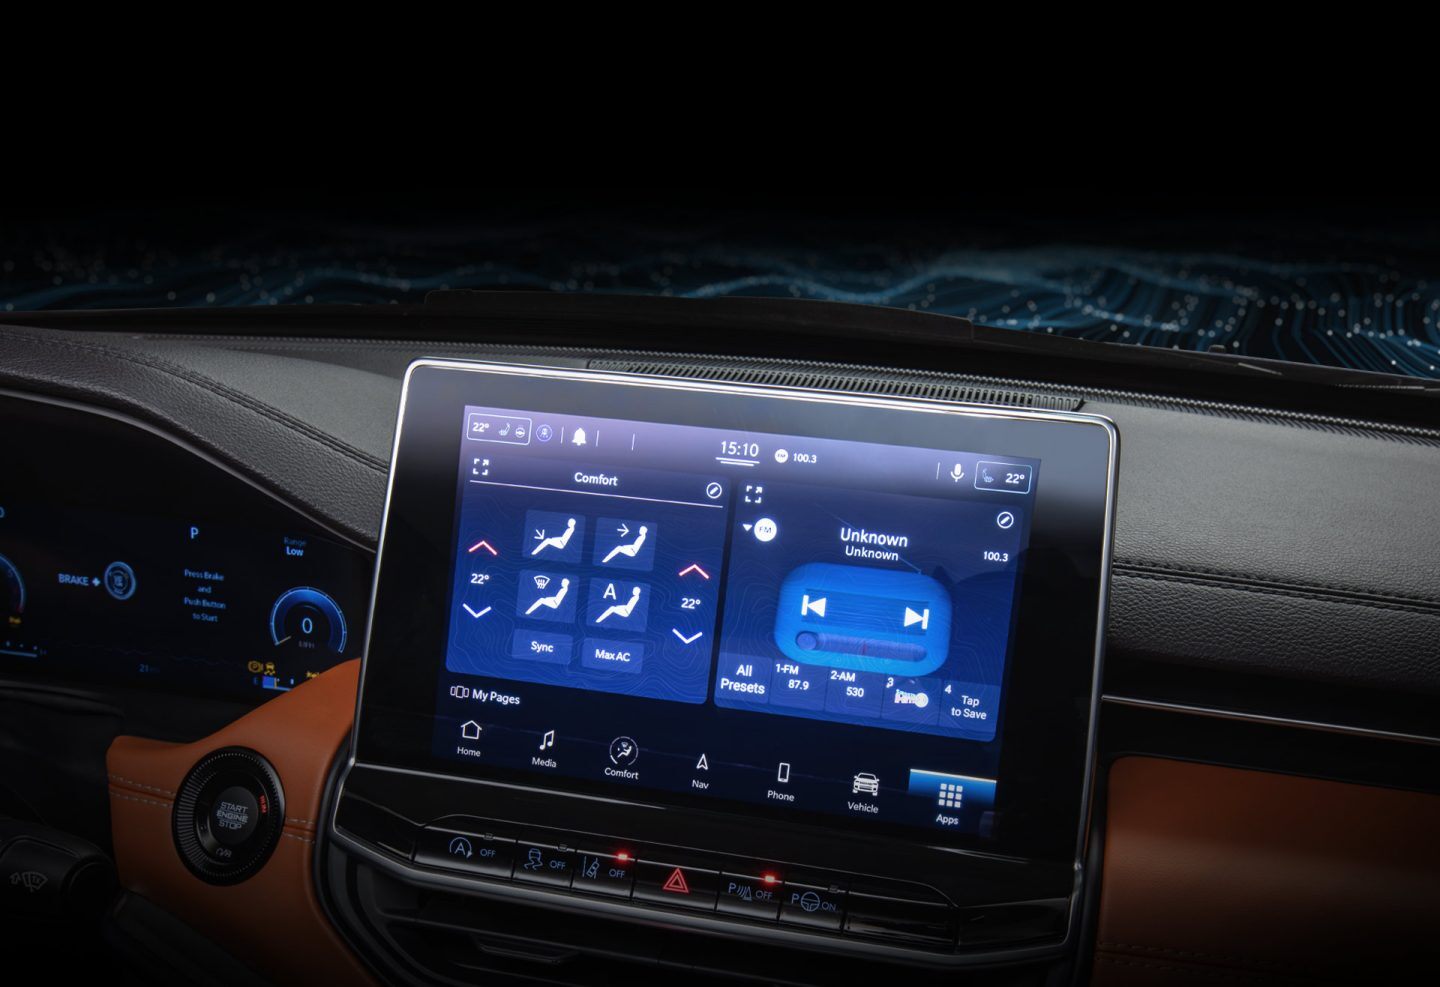 The Uconnect touchscreen in the 2022 Jeep Compass displaying the climate controls.